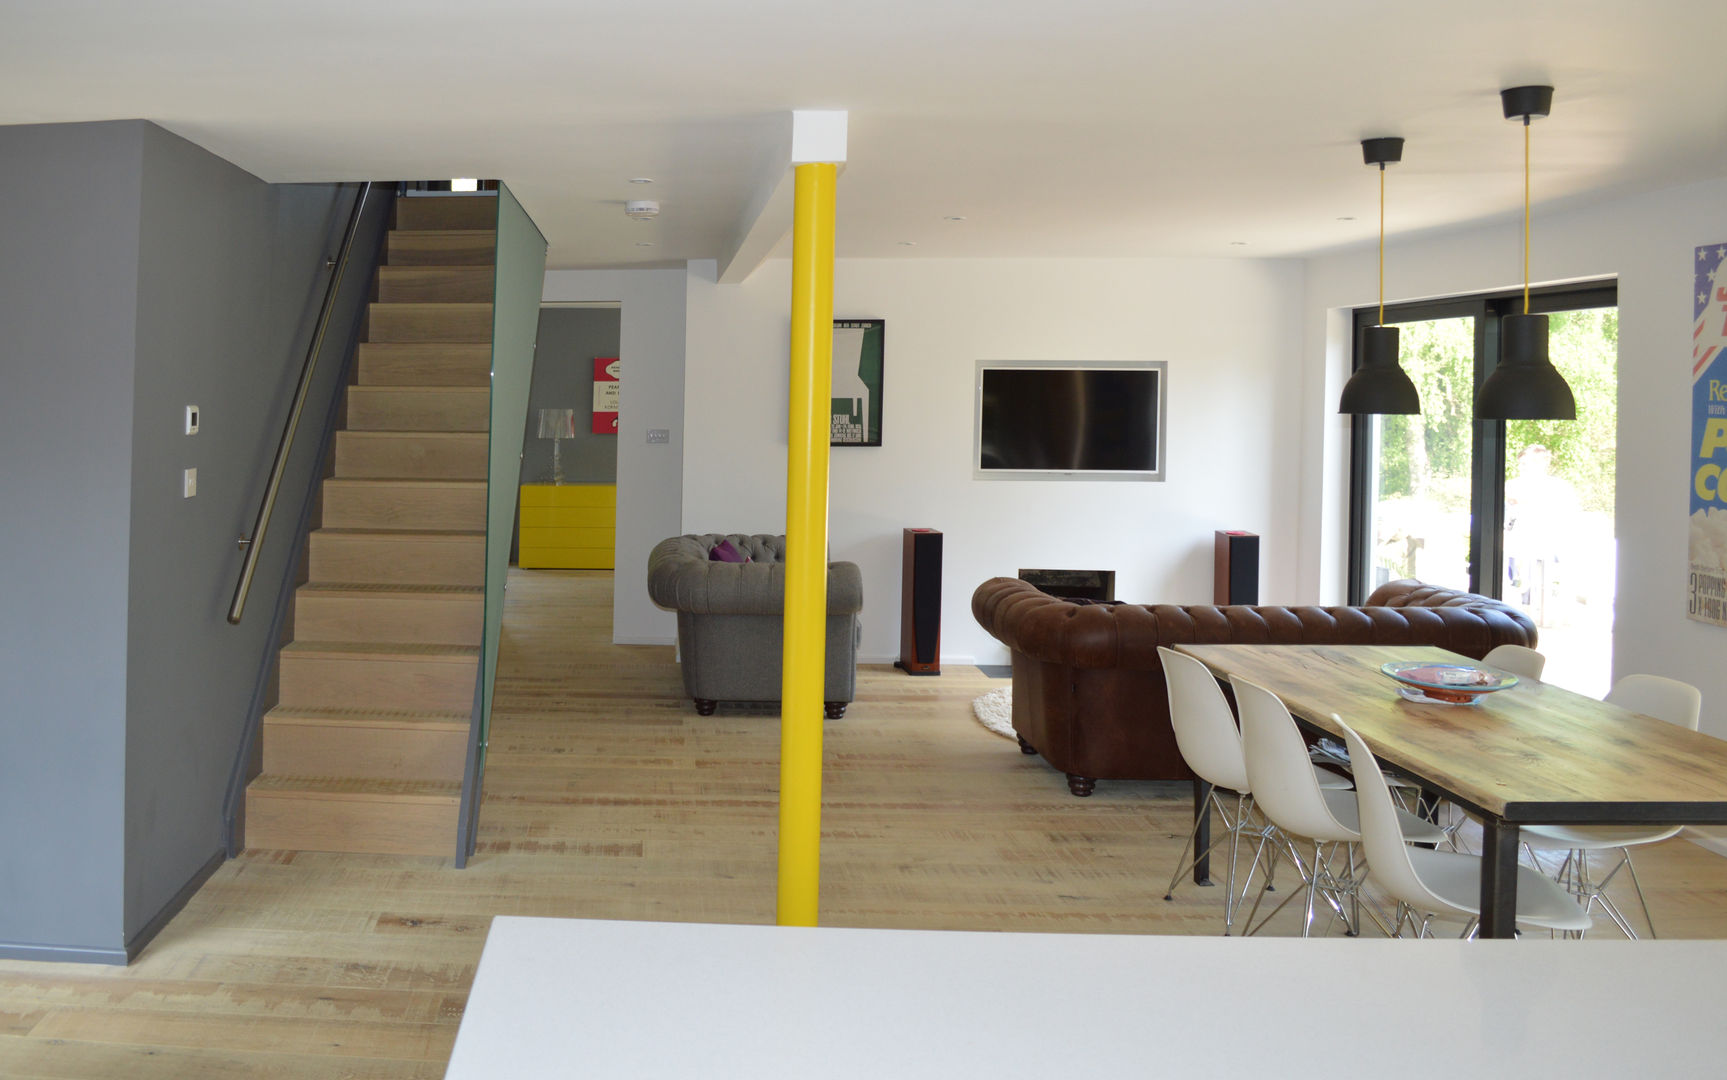 Open Plan Living Area with Timber Flooring Throughout ArchitectureLIVE Moderne eetkamers open space kitchen,open-plan living,kitchen/dining,glass balustrade,yellow accent,leather sofas,full height glazing